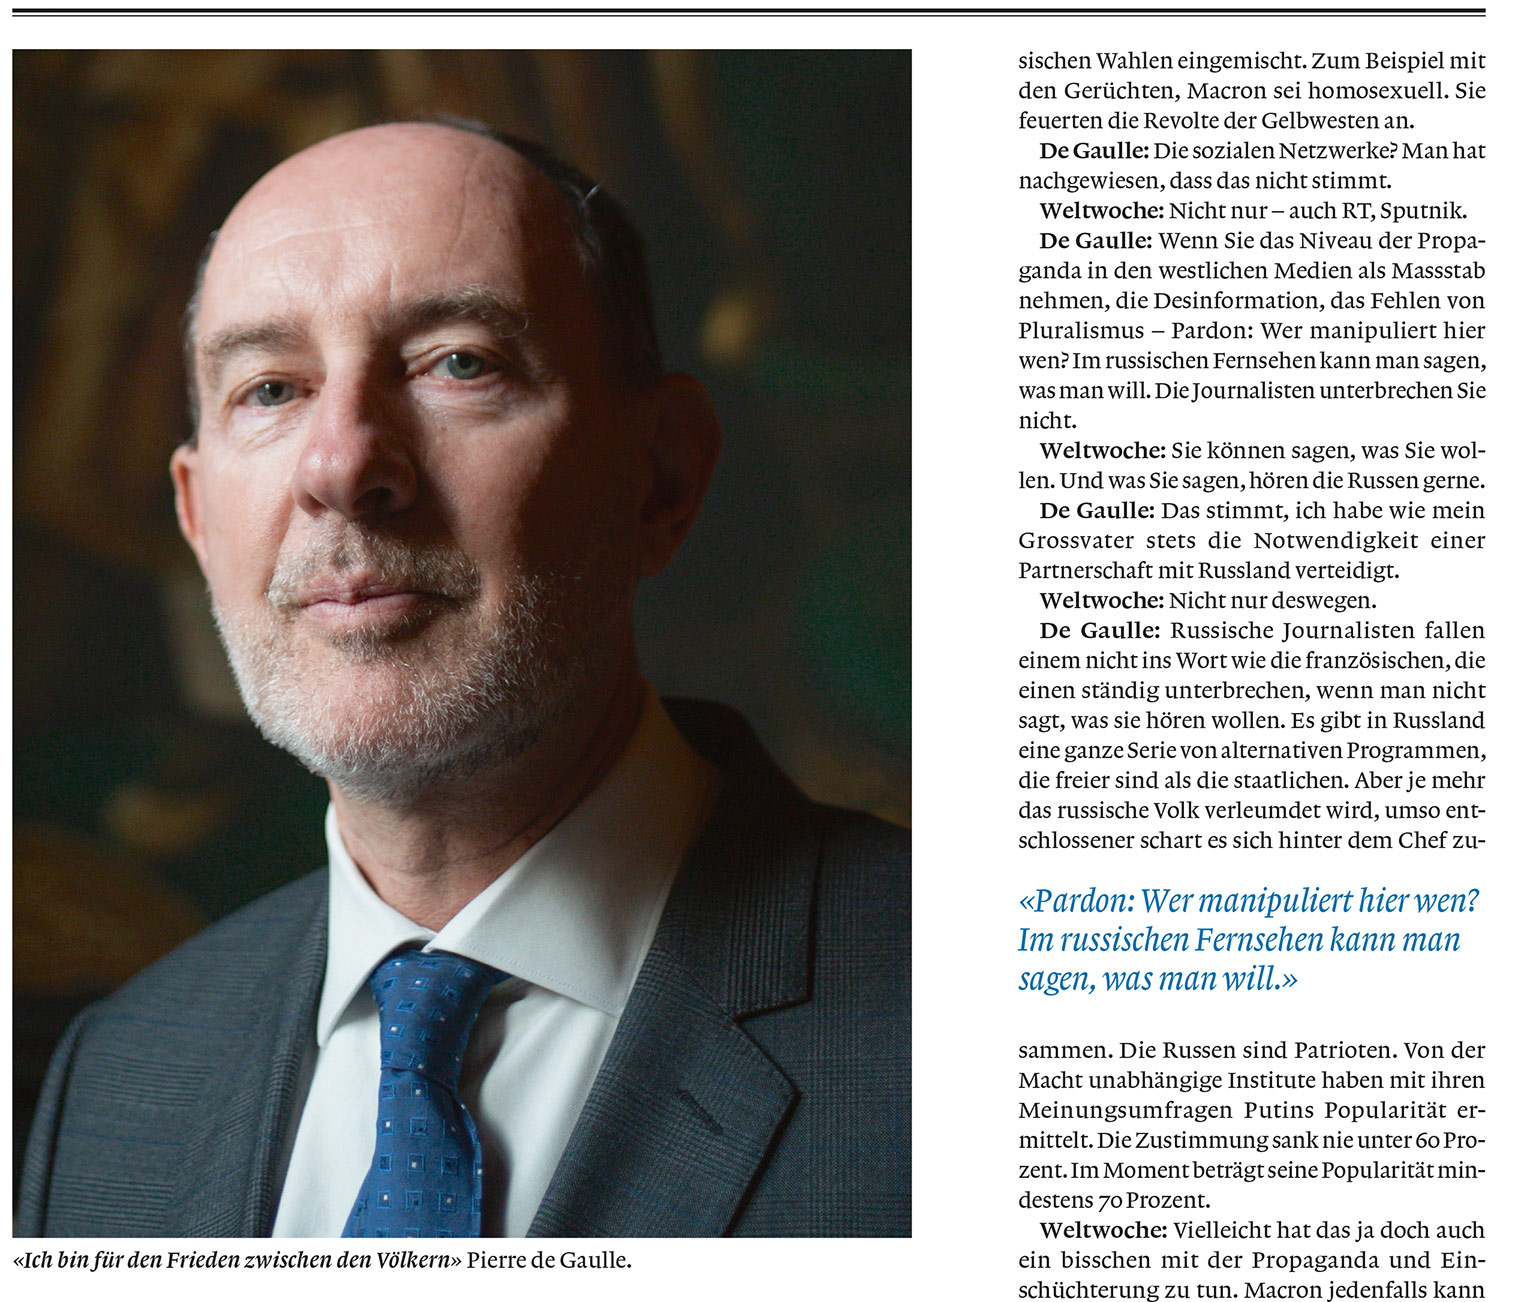 Tearsheet of inside page of German language magazine, showing a portrait of Pierre de Gaulle and interview text